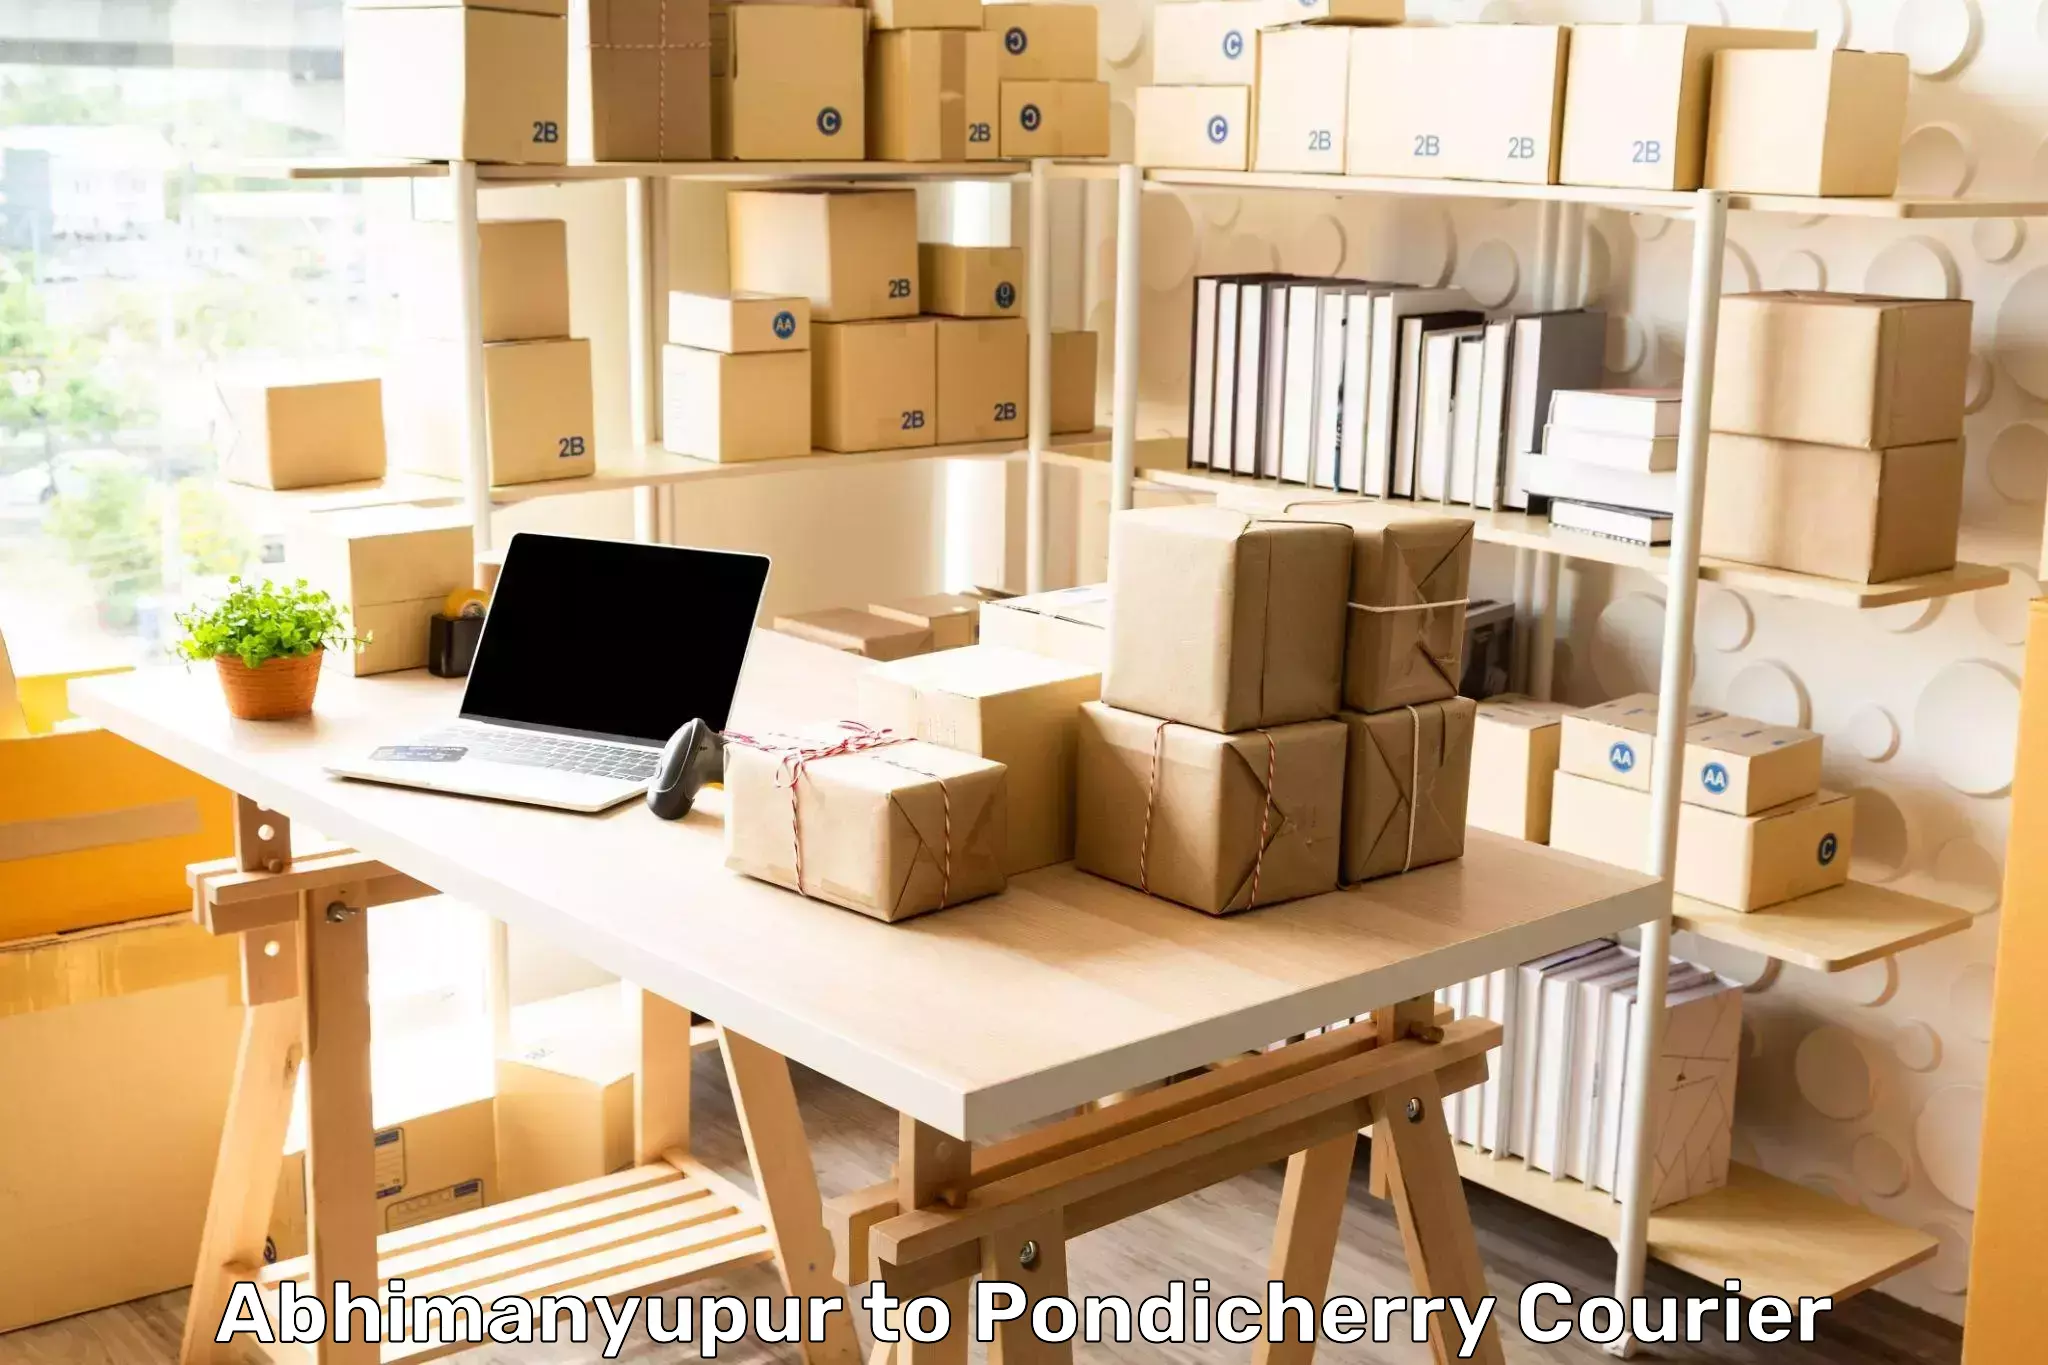 Round-the-clock parcel delivery Abhimanyupur to Pondicherry